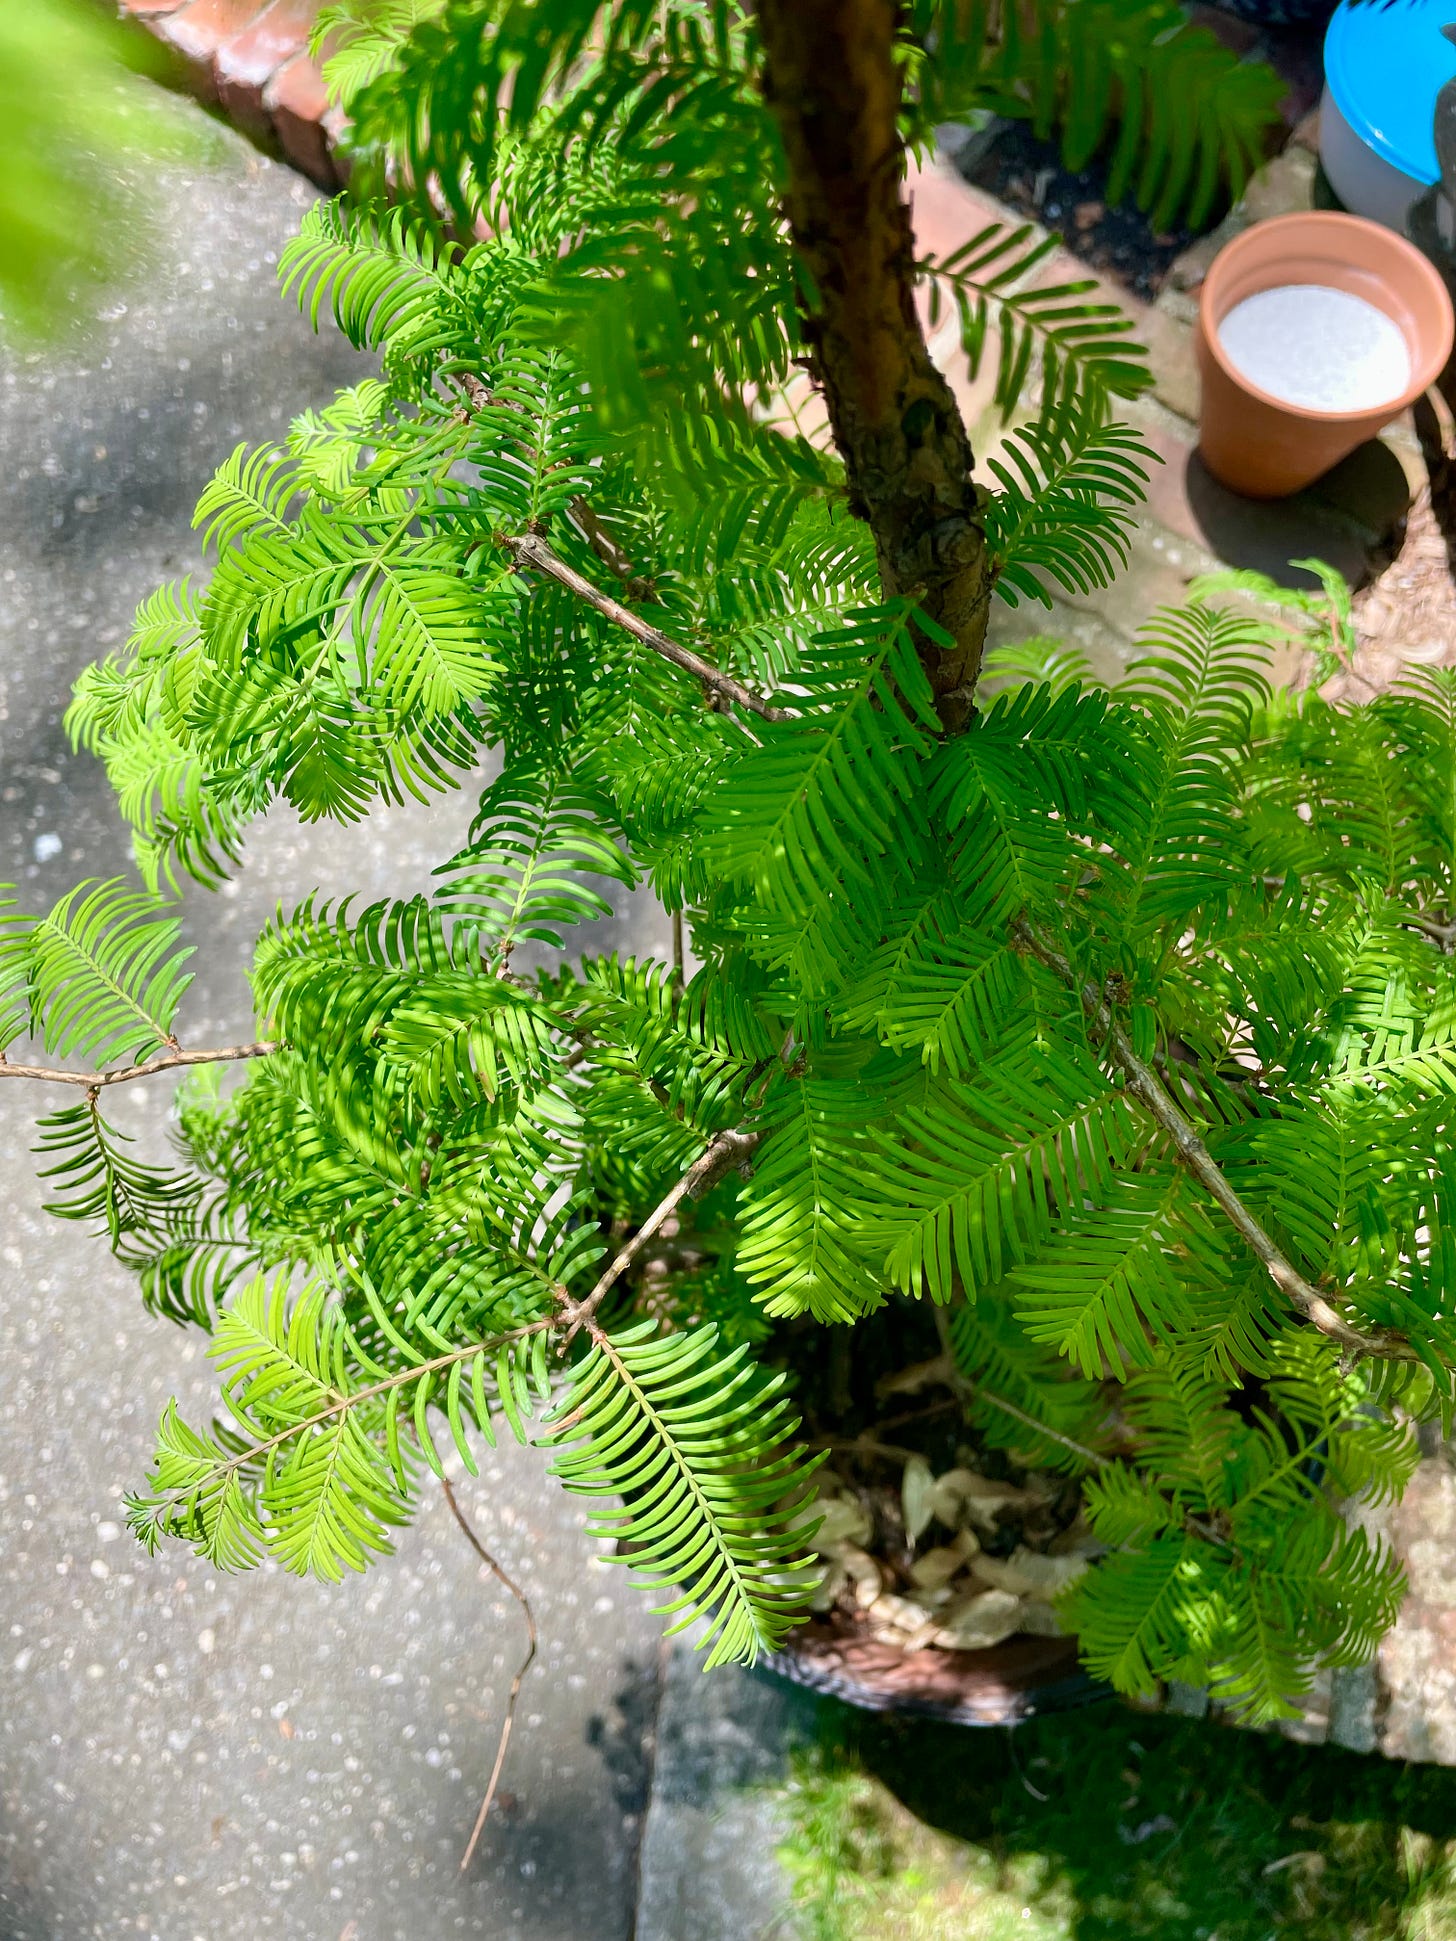 ID: Close up of the feathery foliage on the dawn redwood